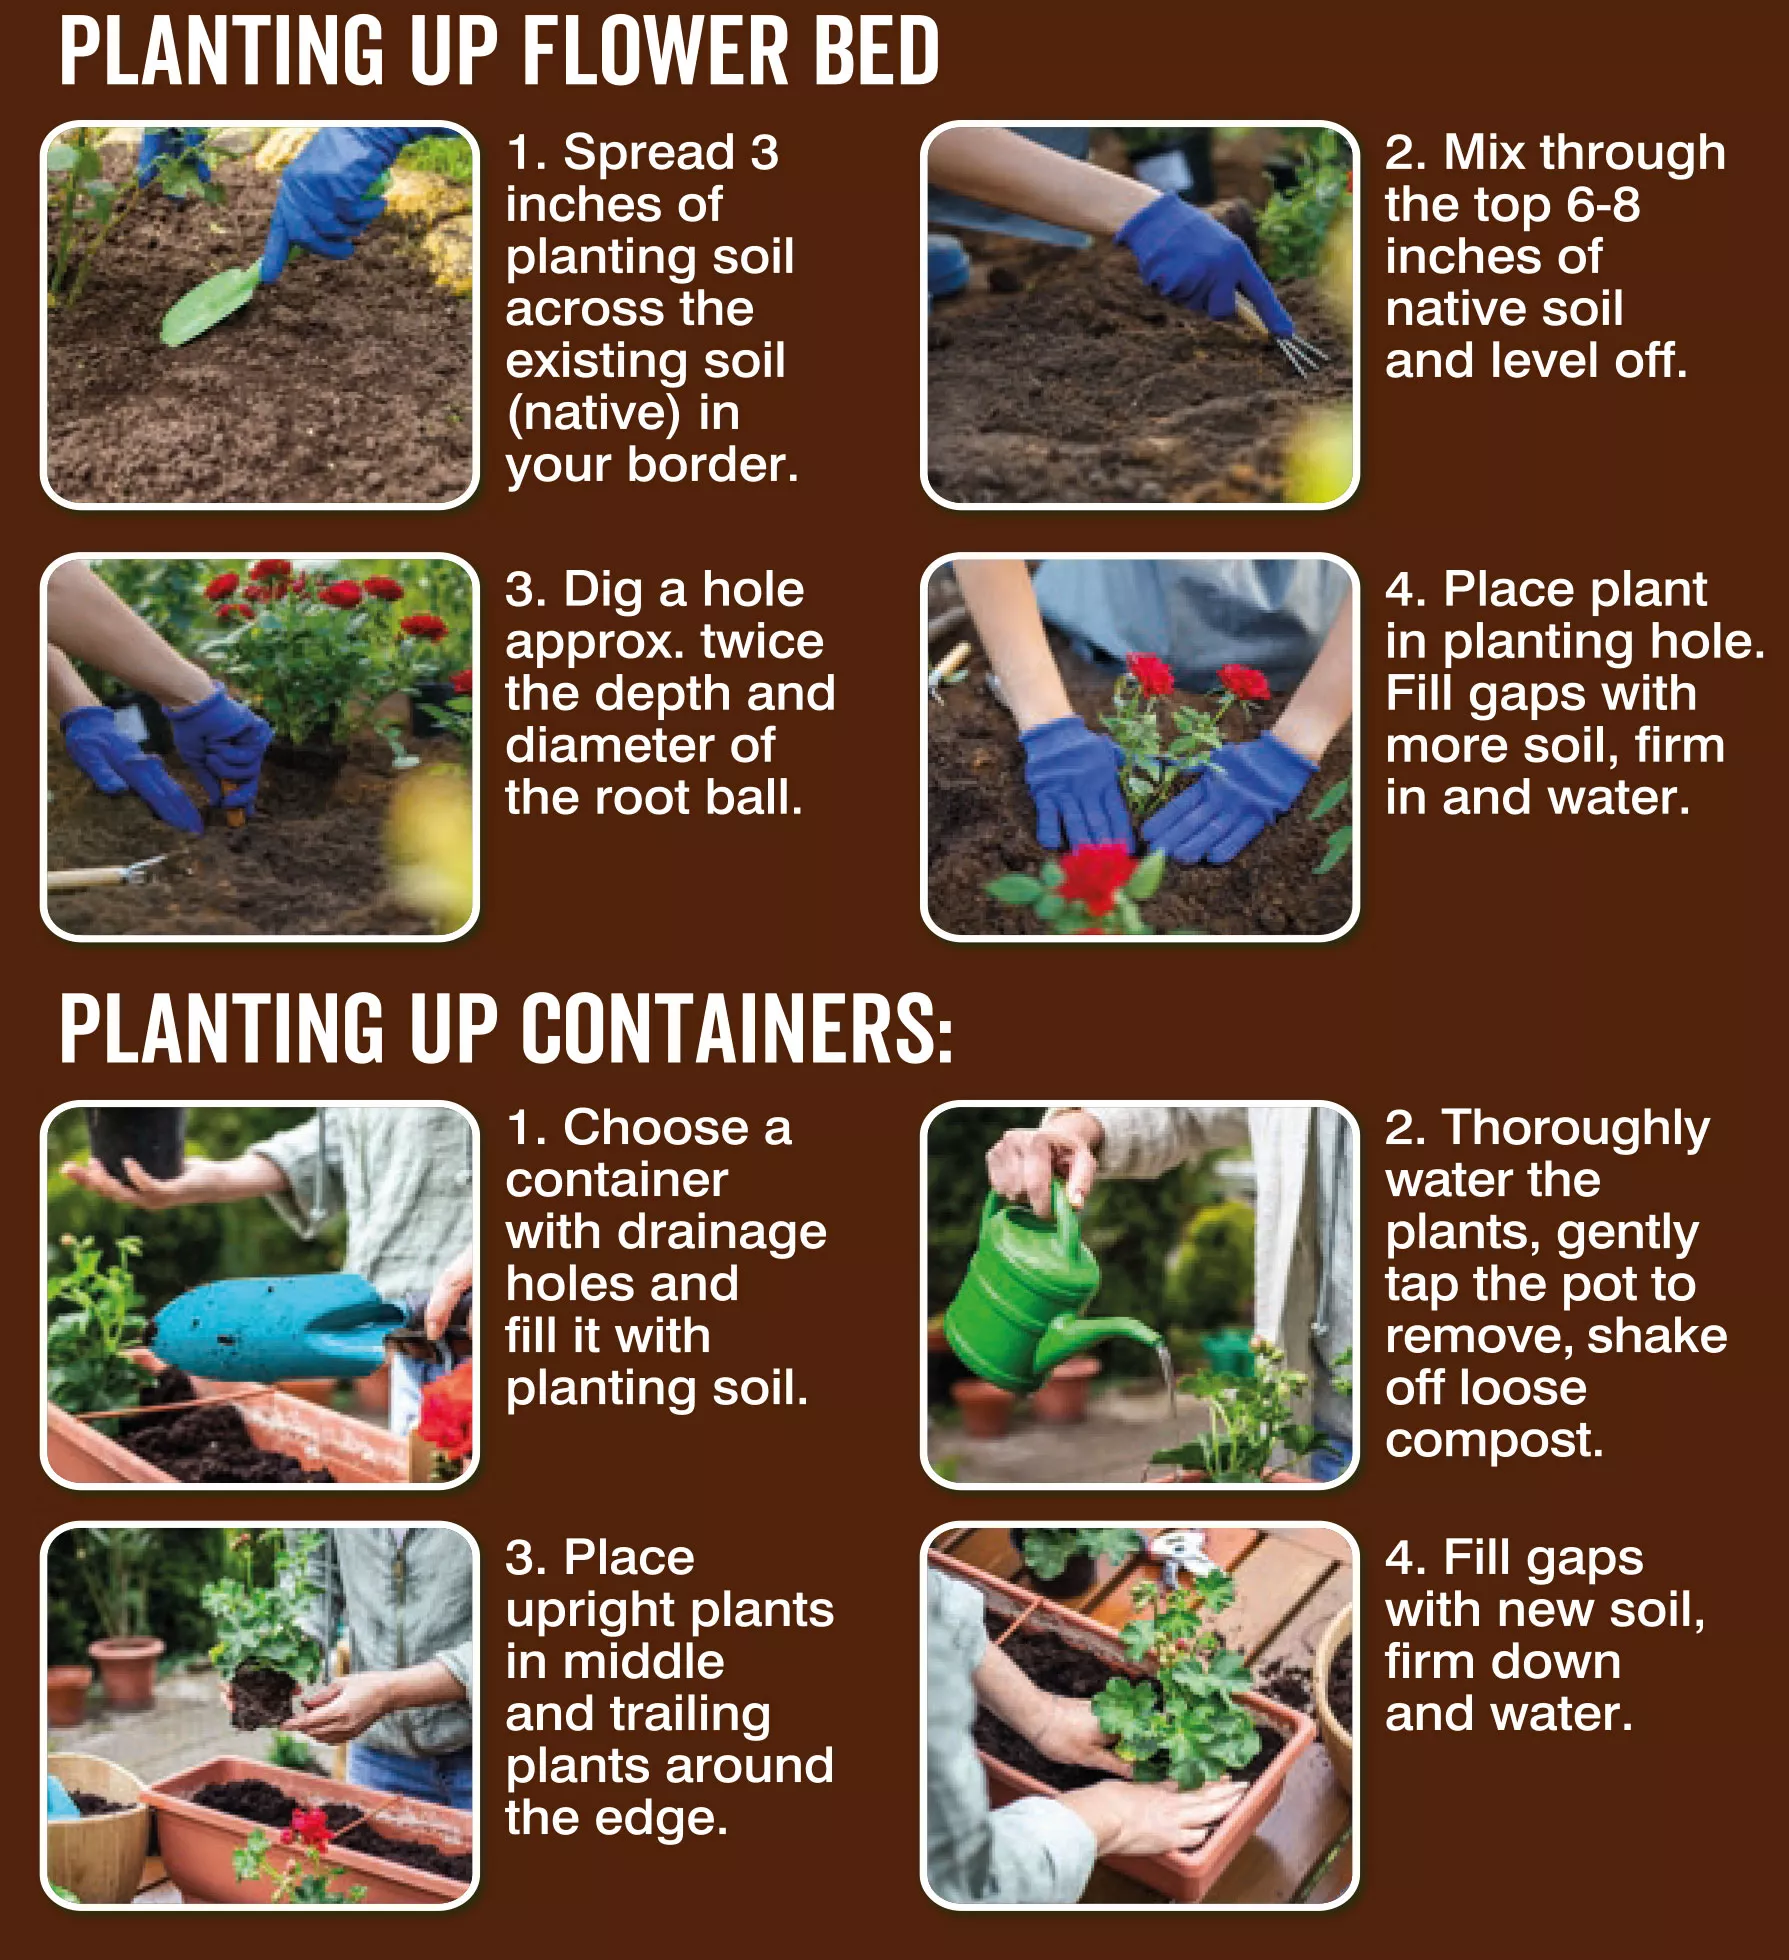 how to use bio-life planting soil for flowers